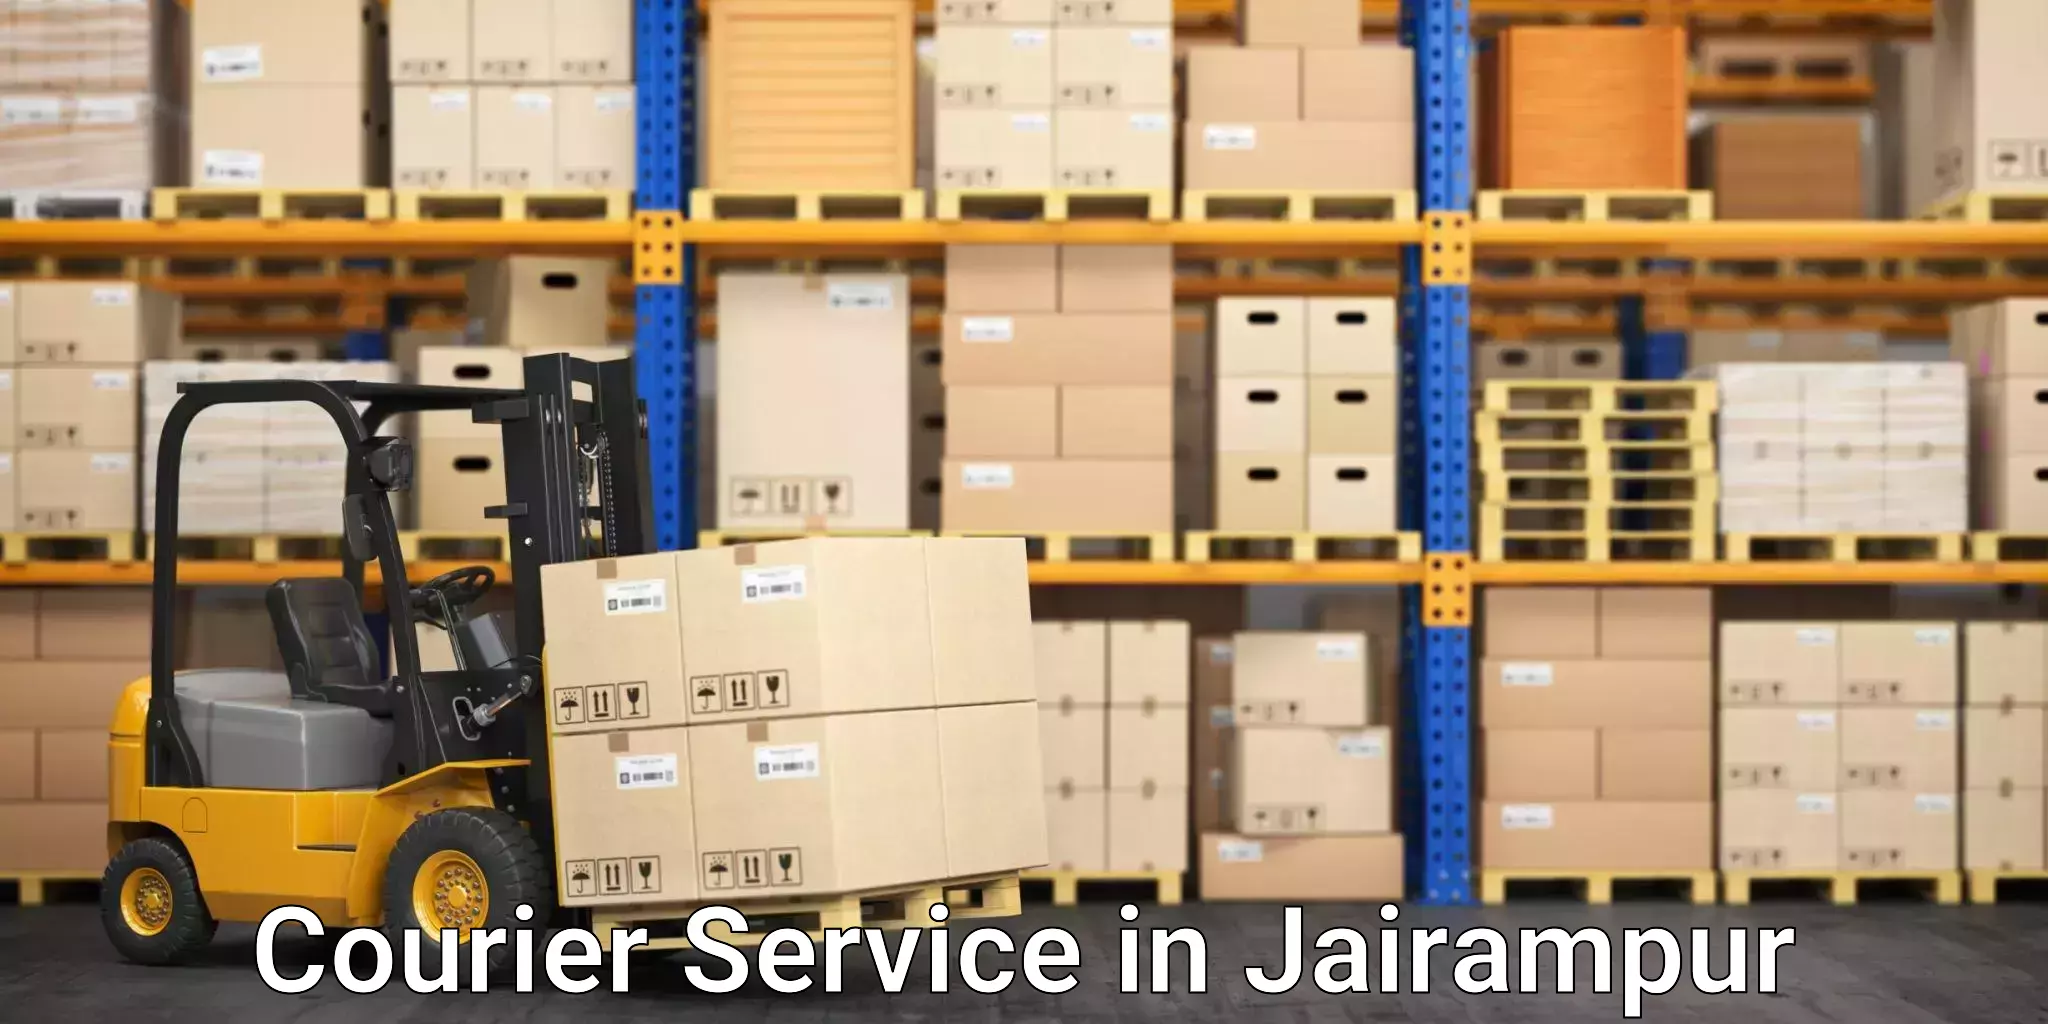 Reliable shipping solutions in Jairampur